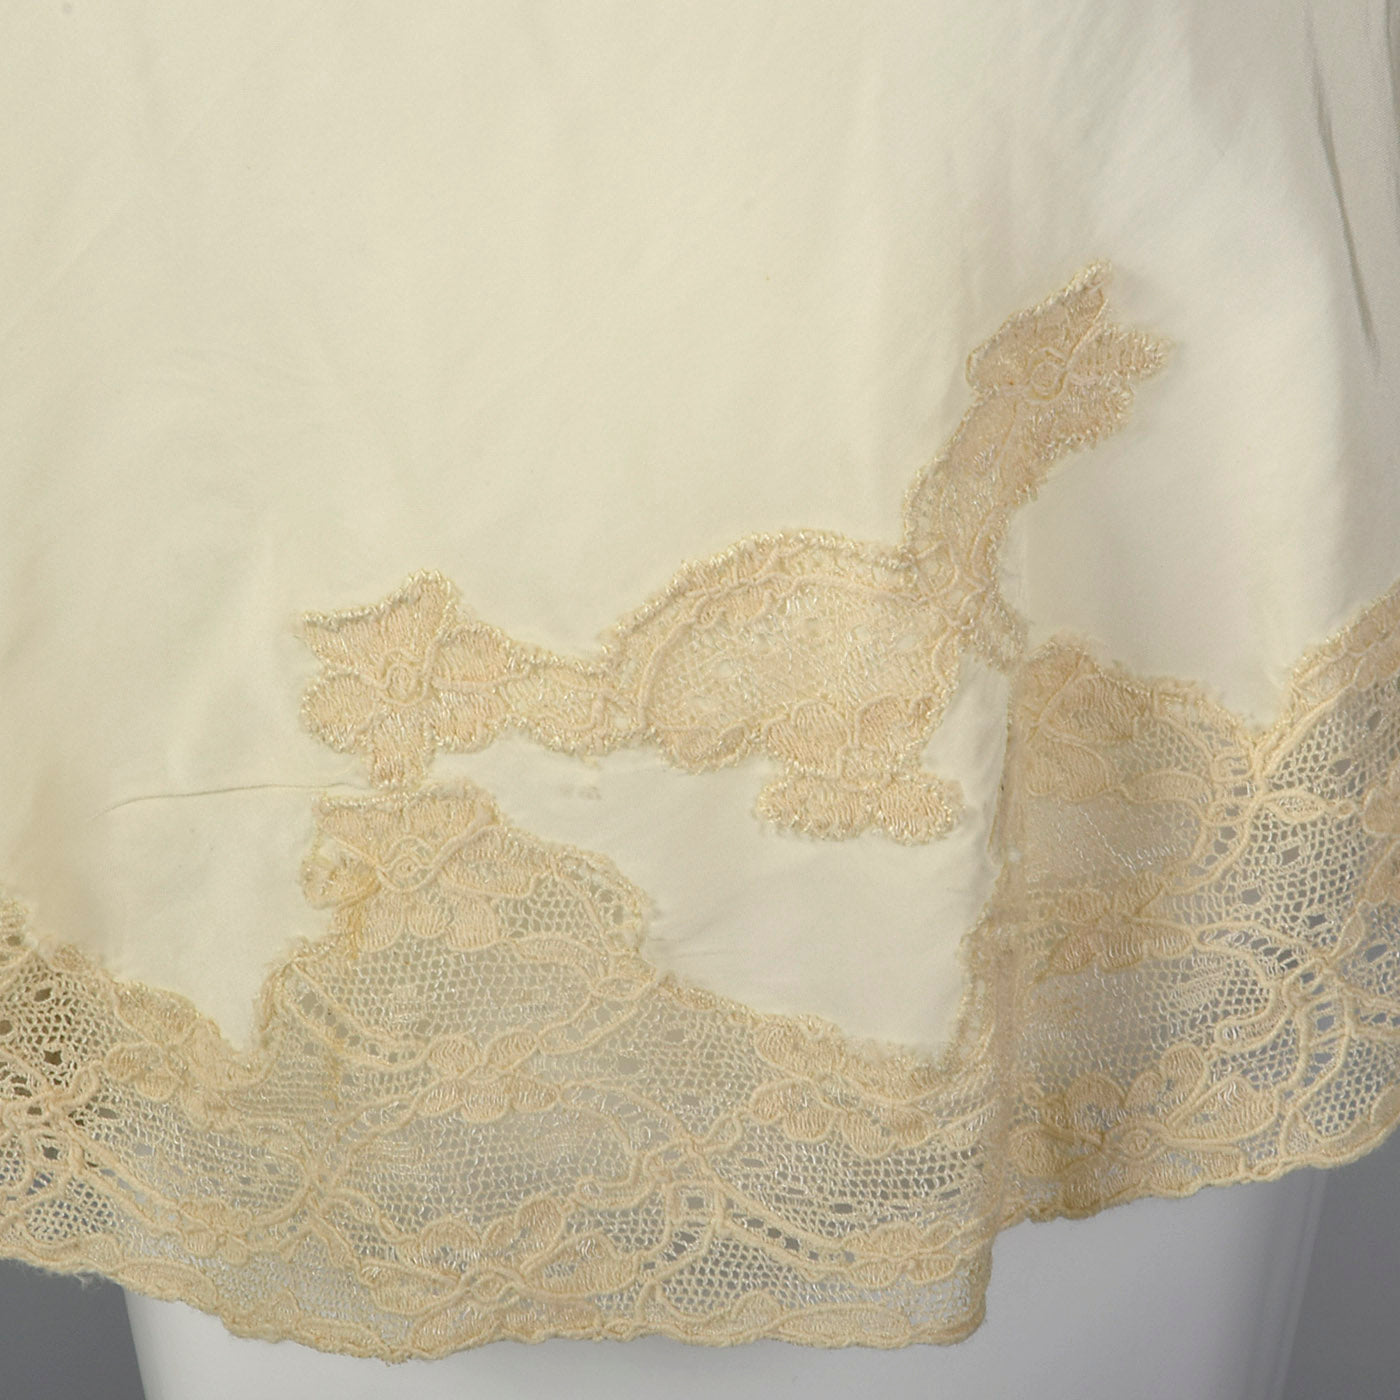 1940s Cream Tap Pants with Lace Trim